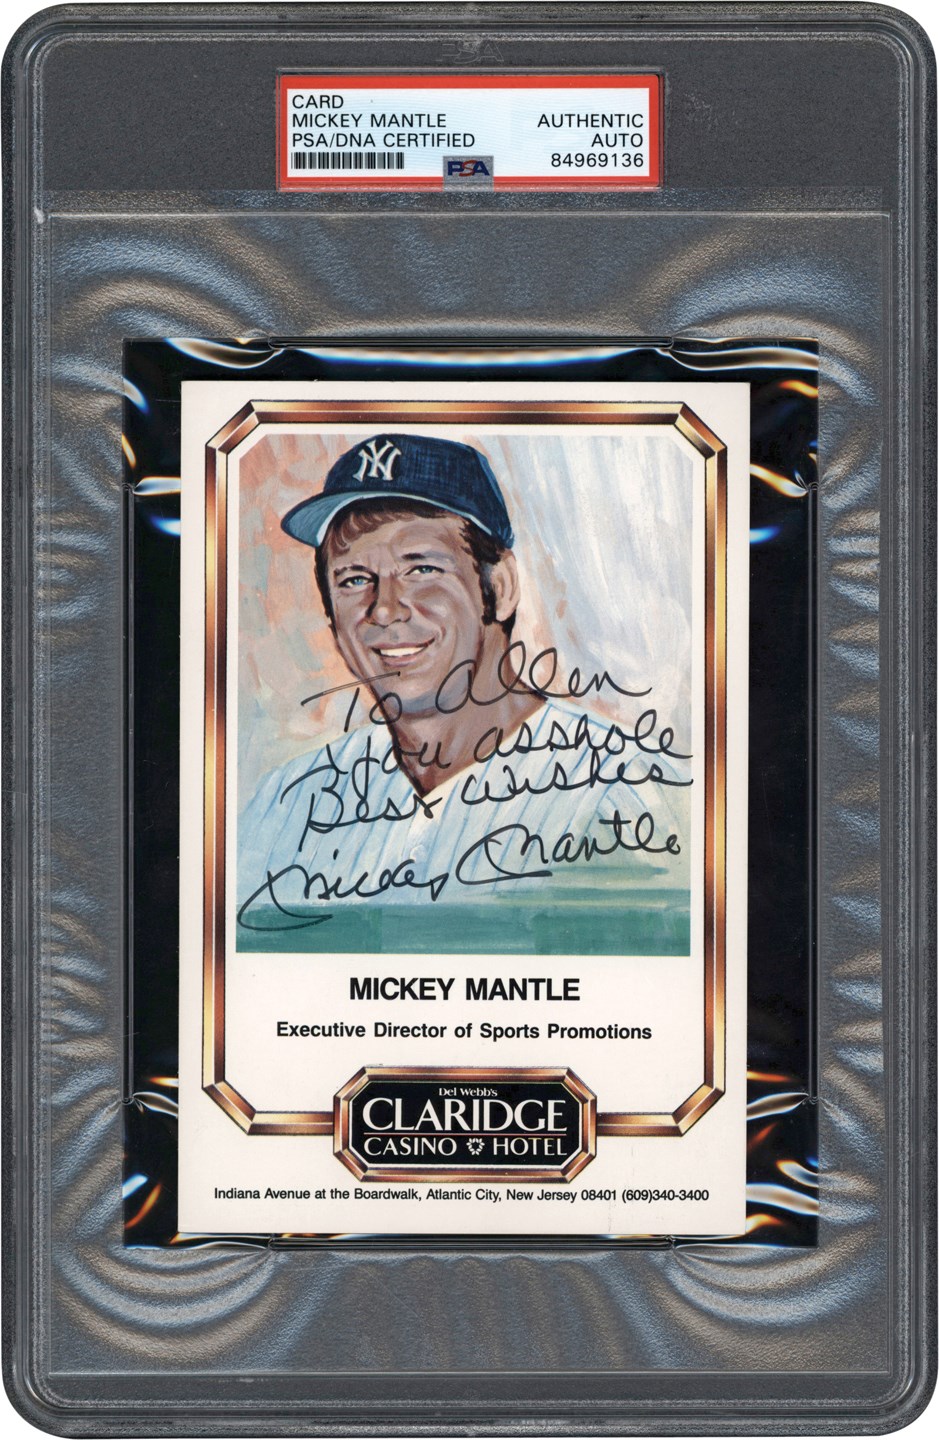 Mantle and Maris - To Allen You A**Hole Best Wishes Mickey Mantle Signed Postcard (PSA)